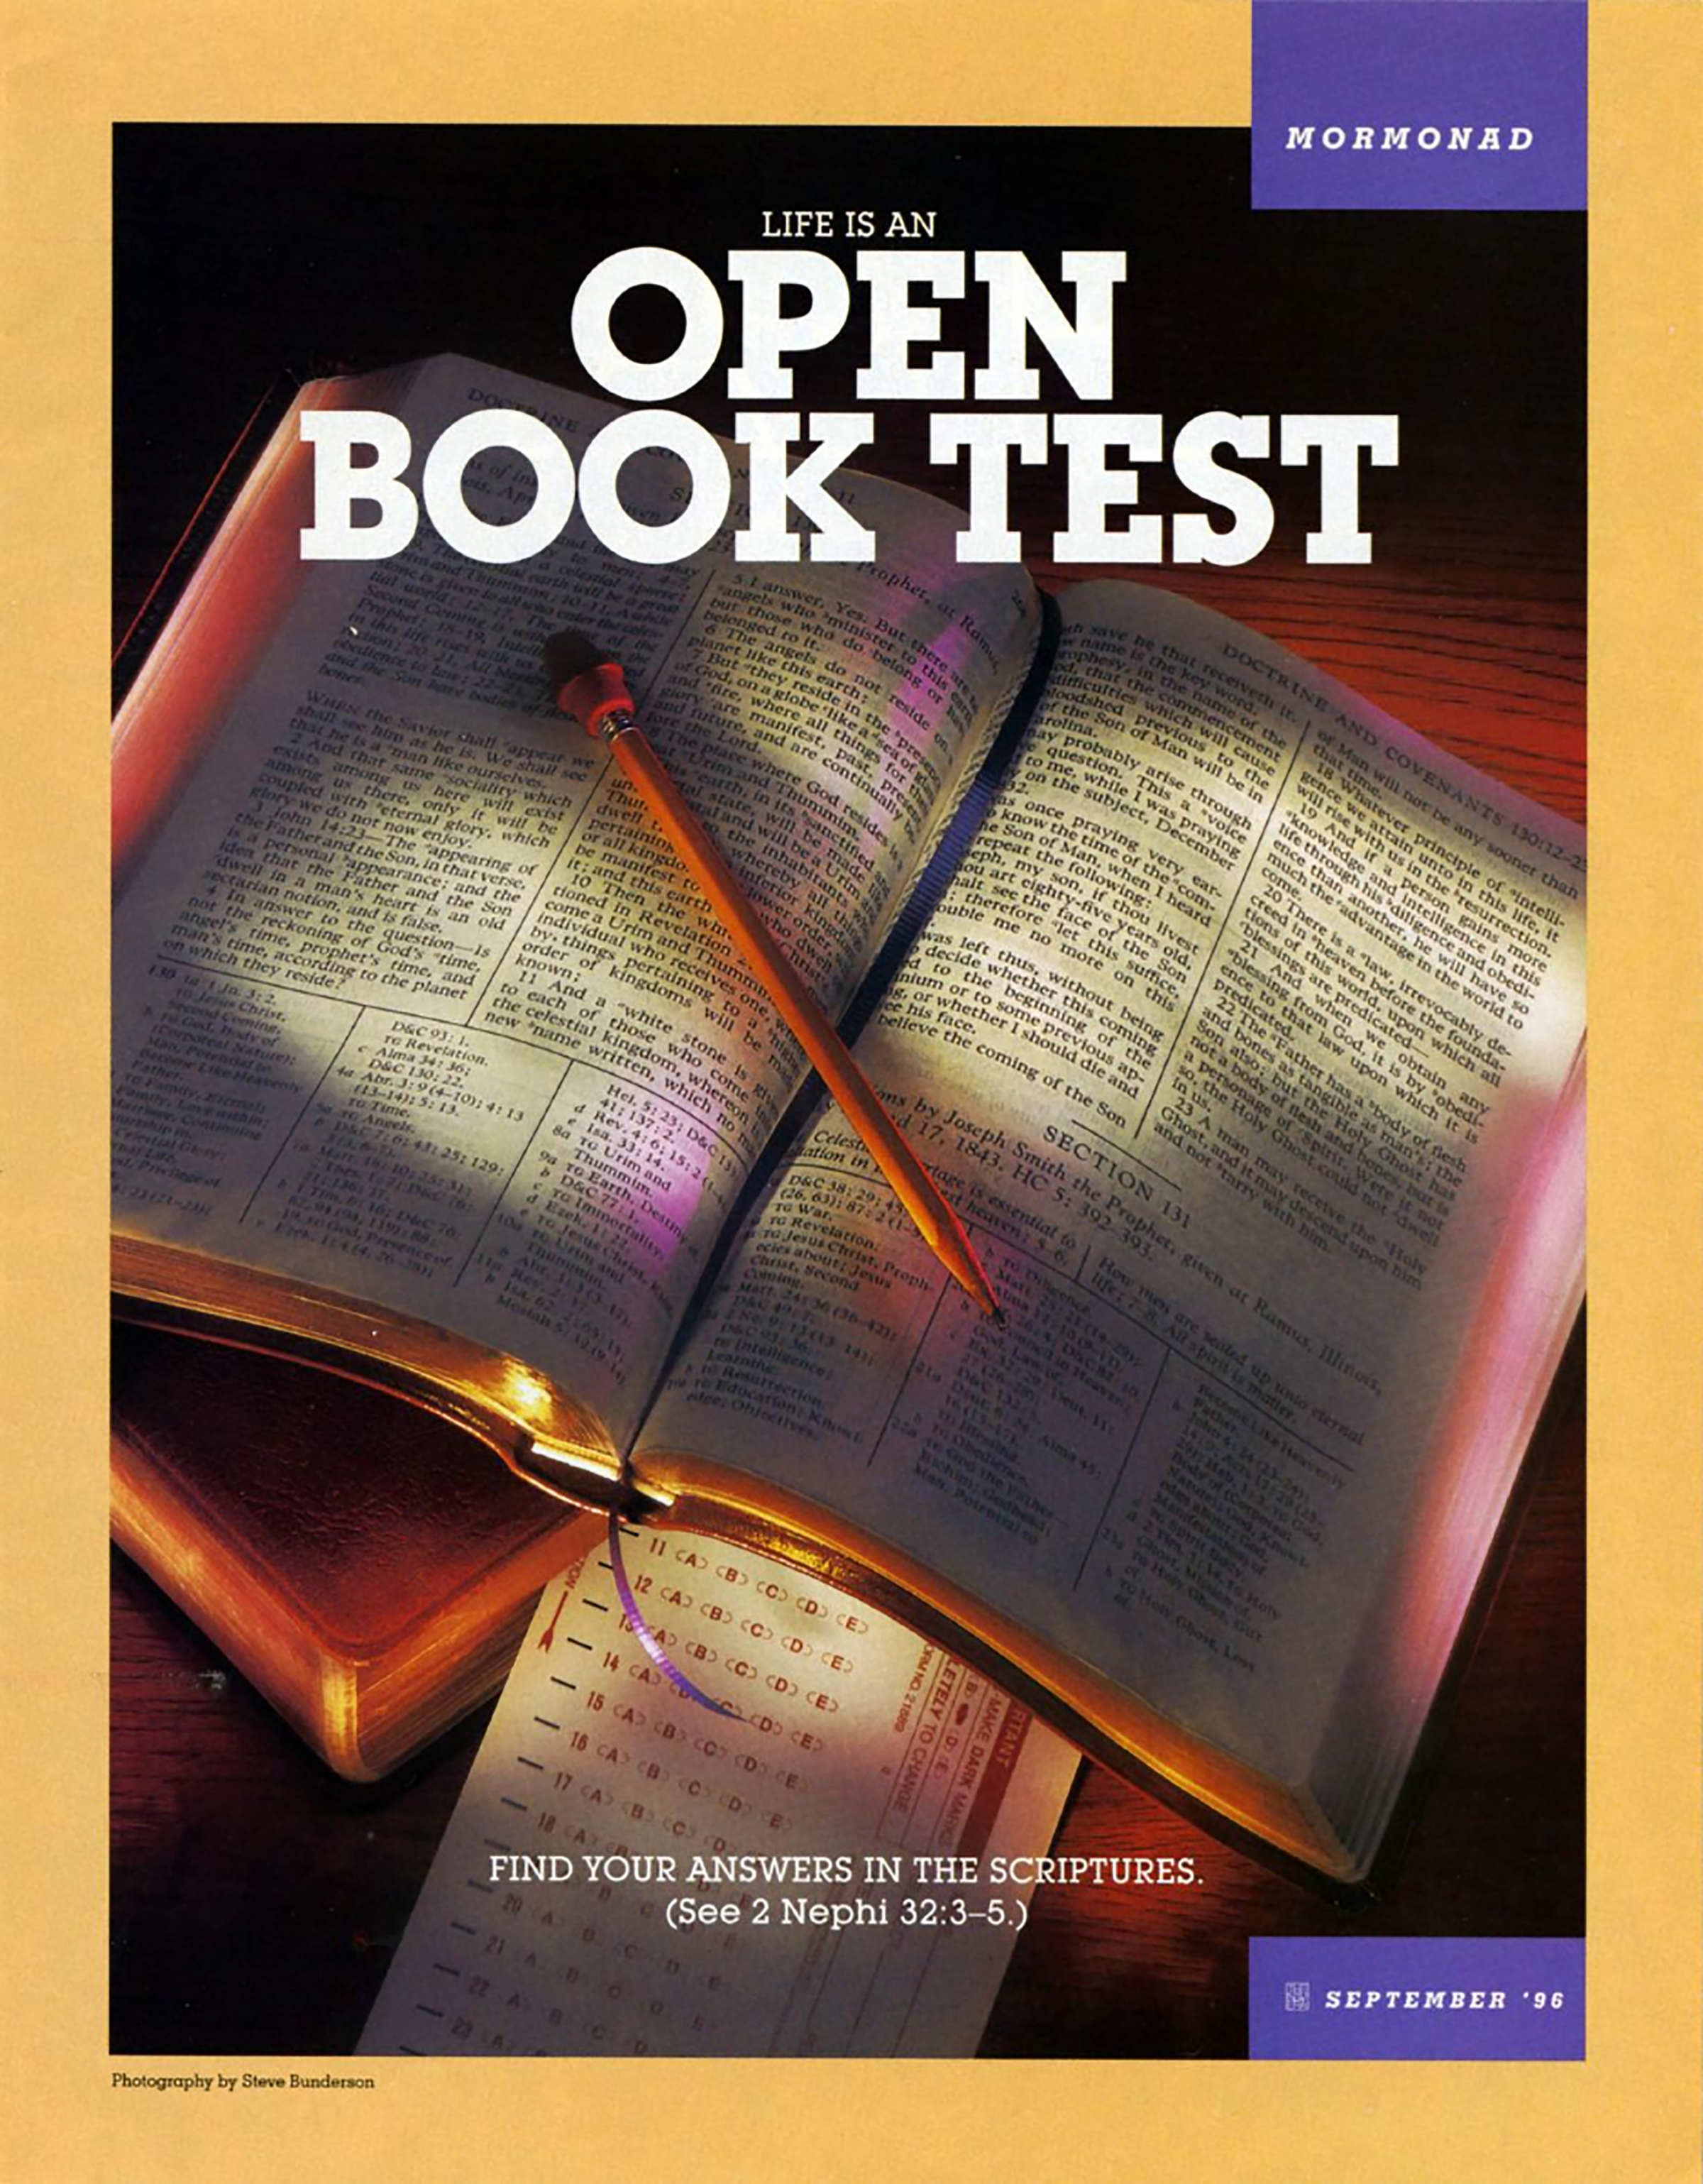 Life Is an Open Book Test